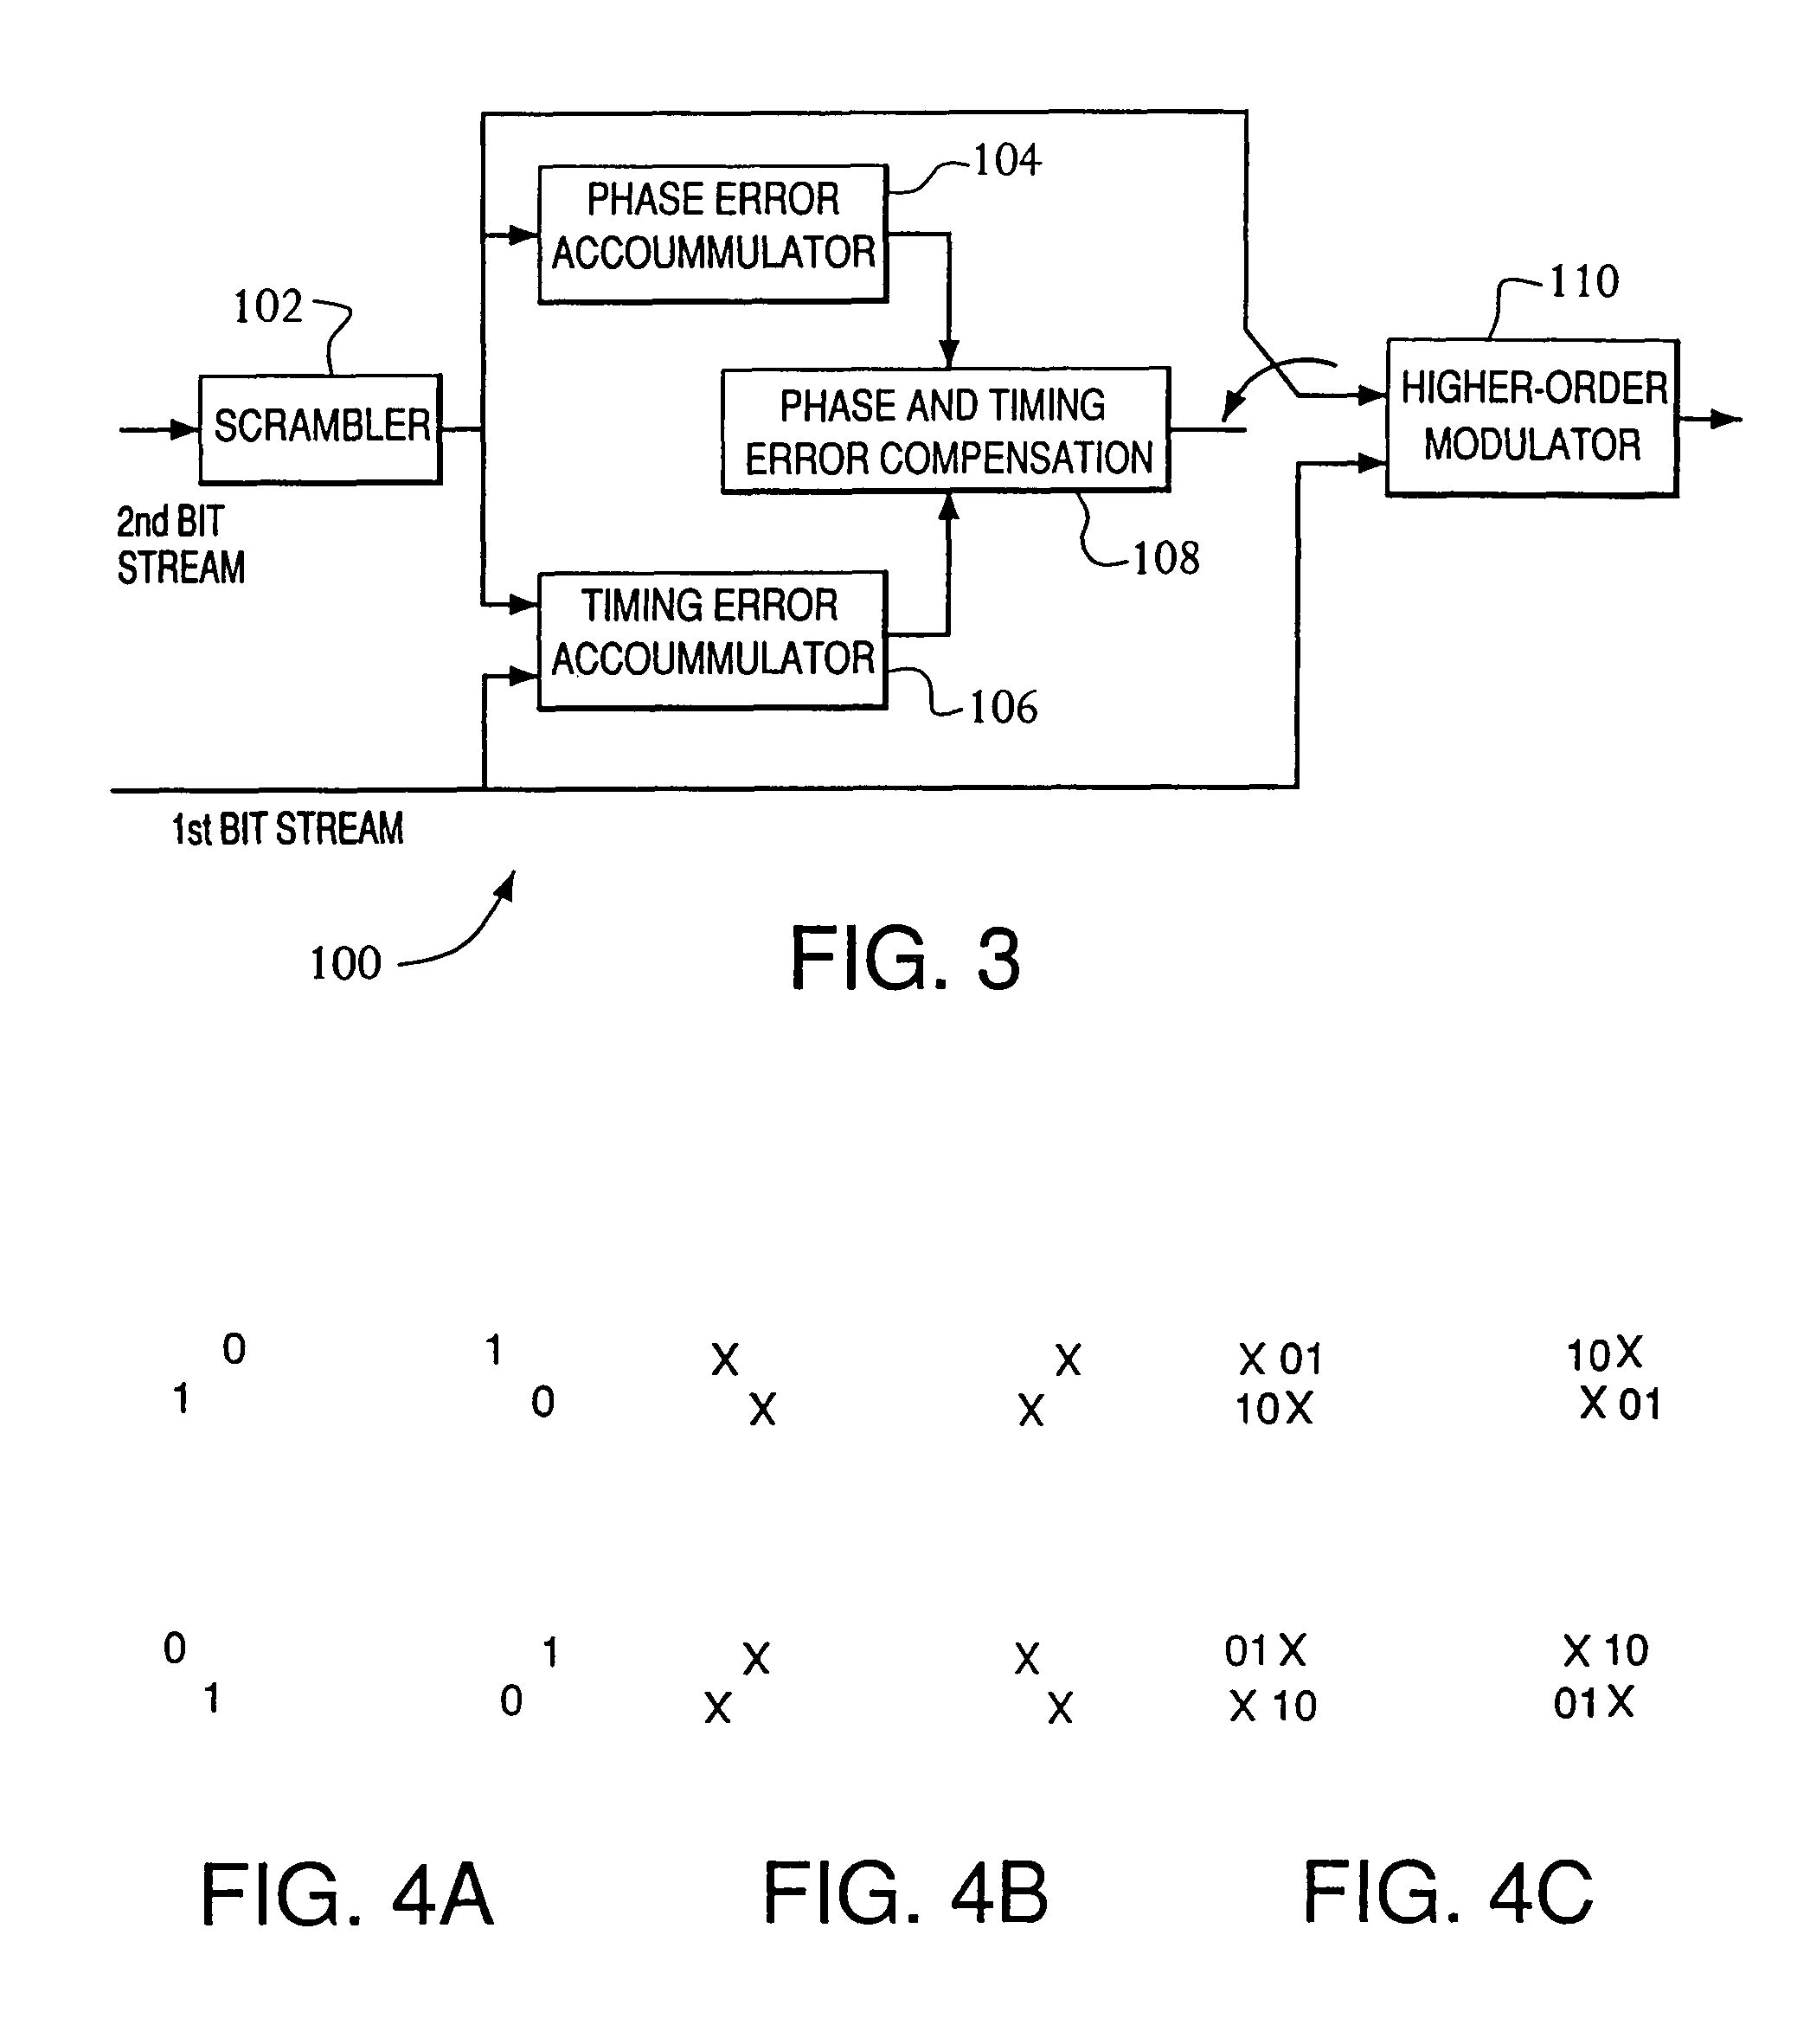 Method and apparatus for providing higher order modulation that is backwards compatible with quaternary phase shift keying(QPSK) or offset quaternary phase shift keying (OQPSK)